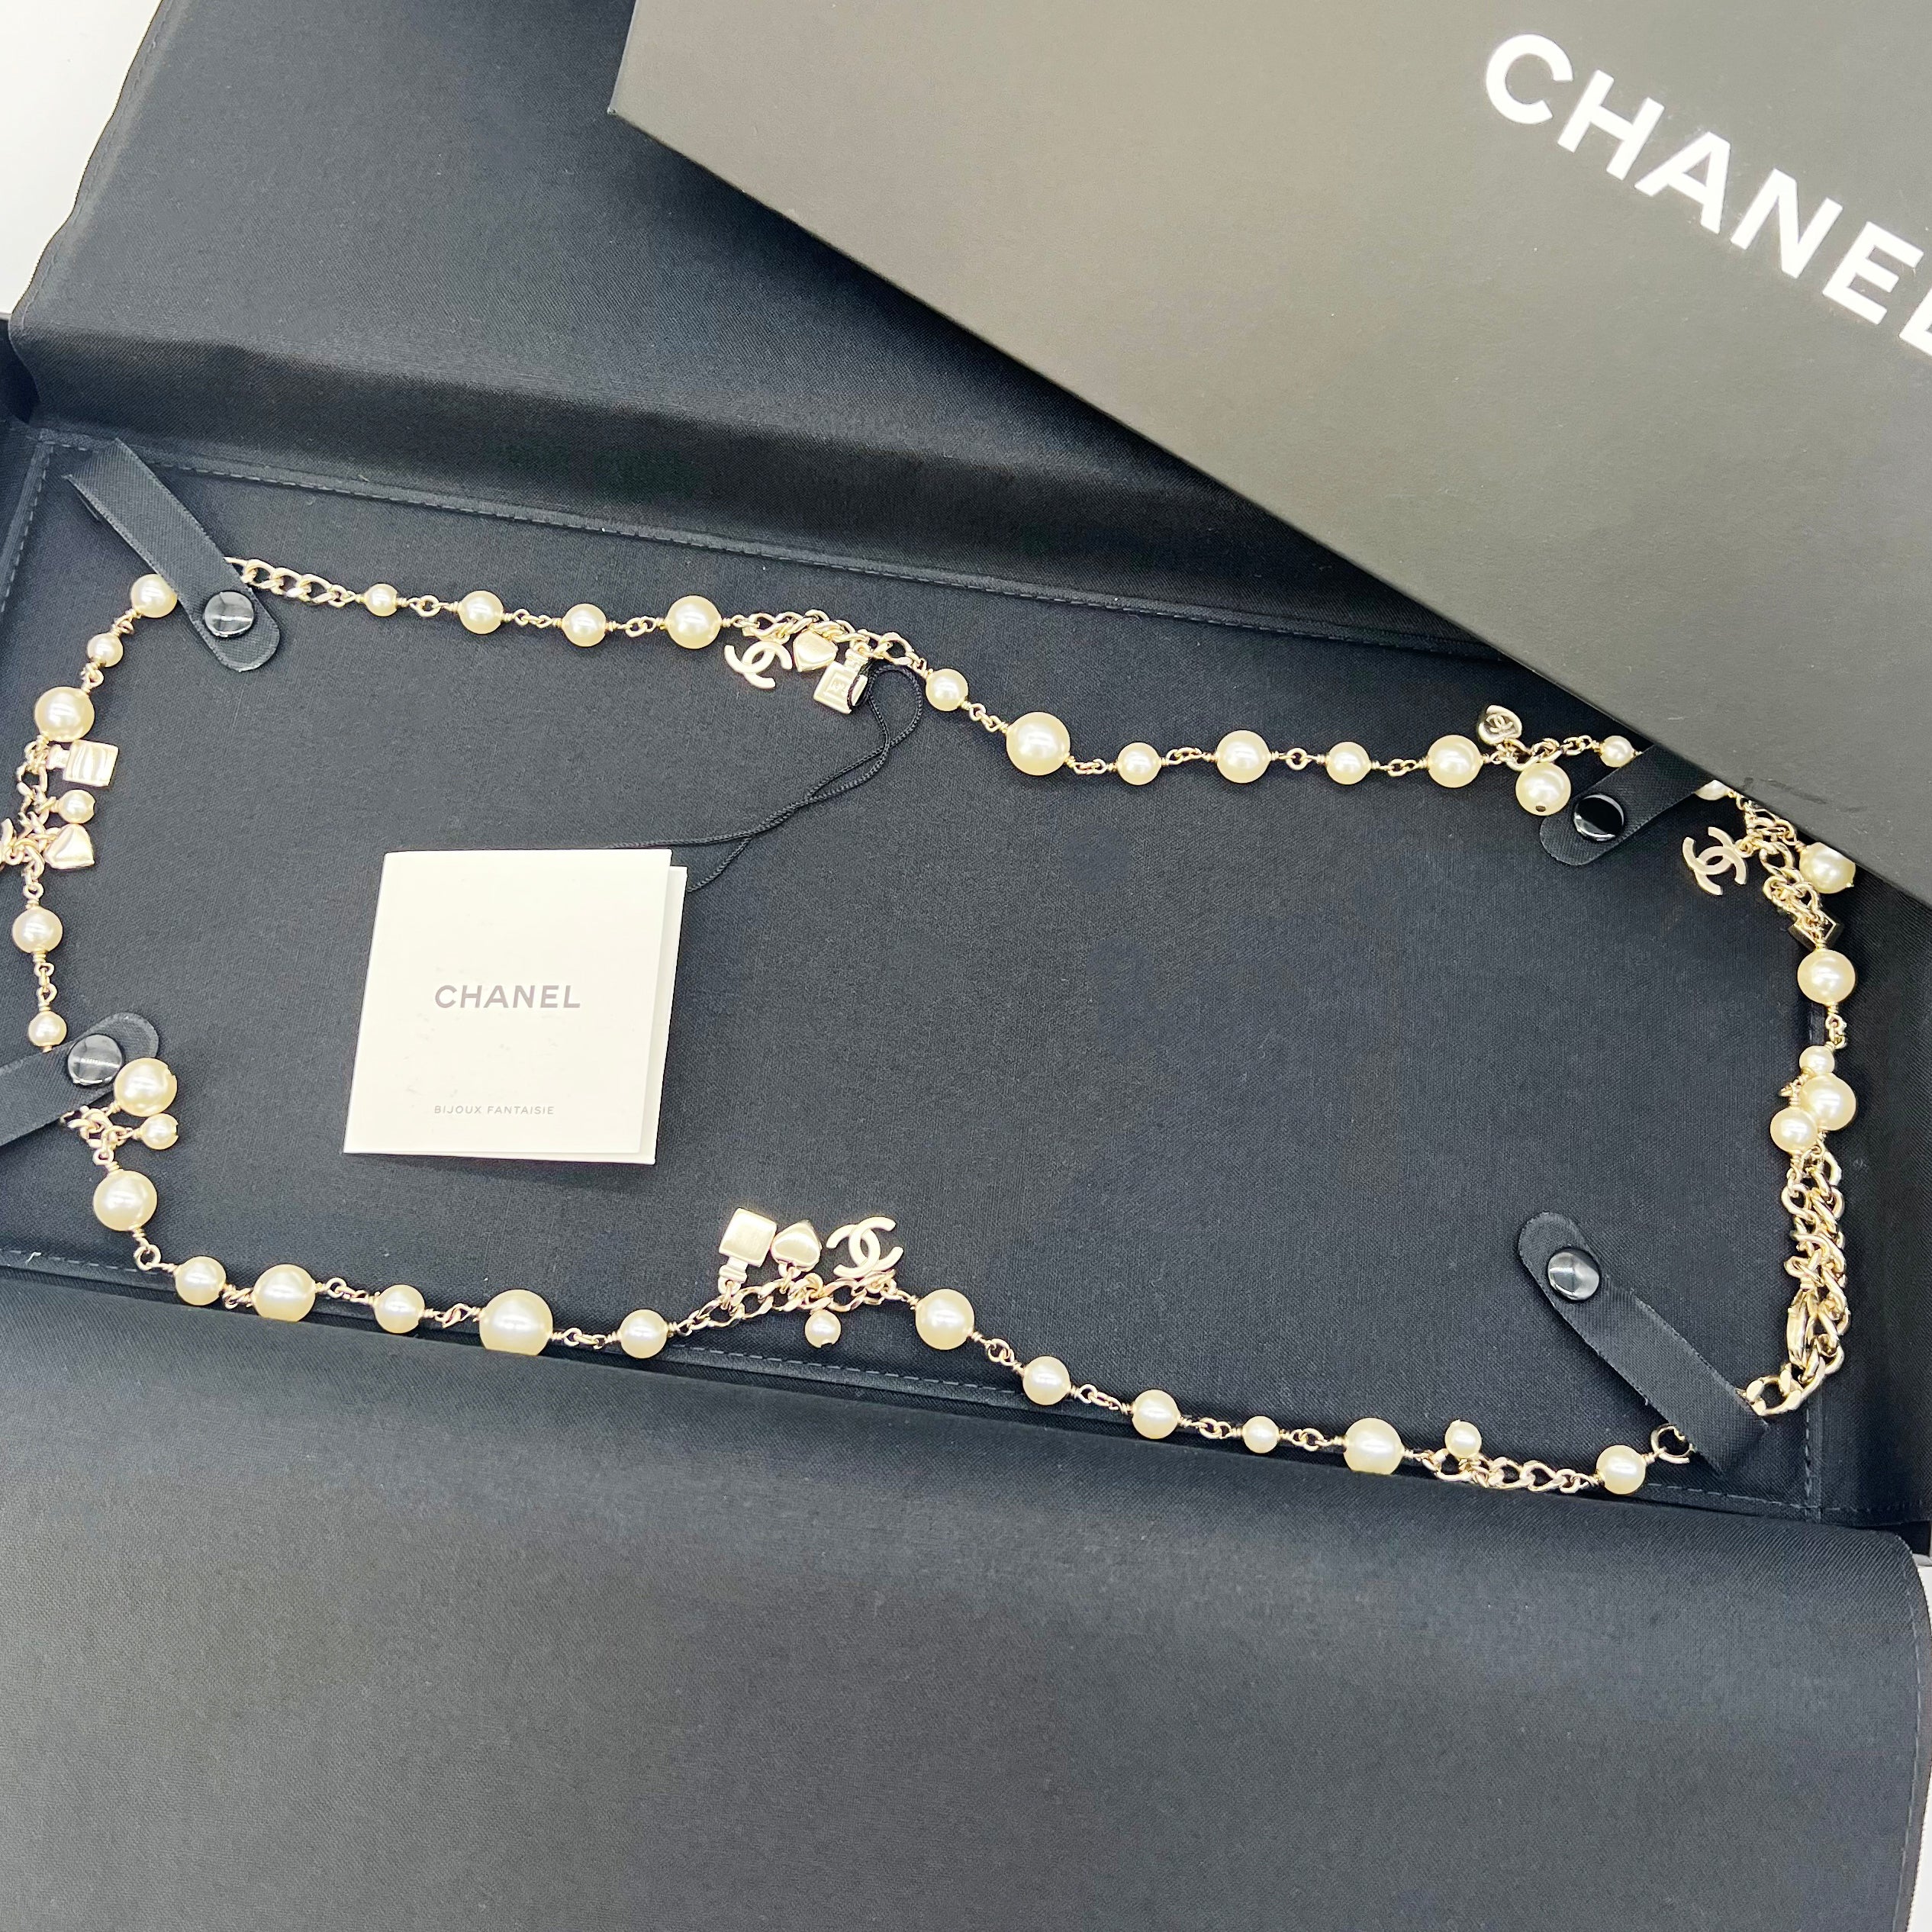 Guaranteed Authentic Chanel Pearl Multi Strand With Perfume, Heart and CC Long Necklace 17”